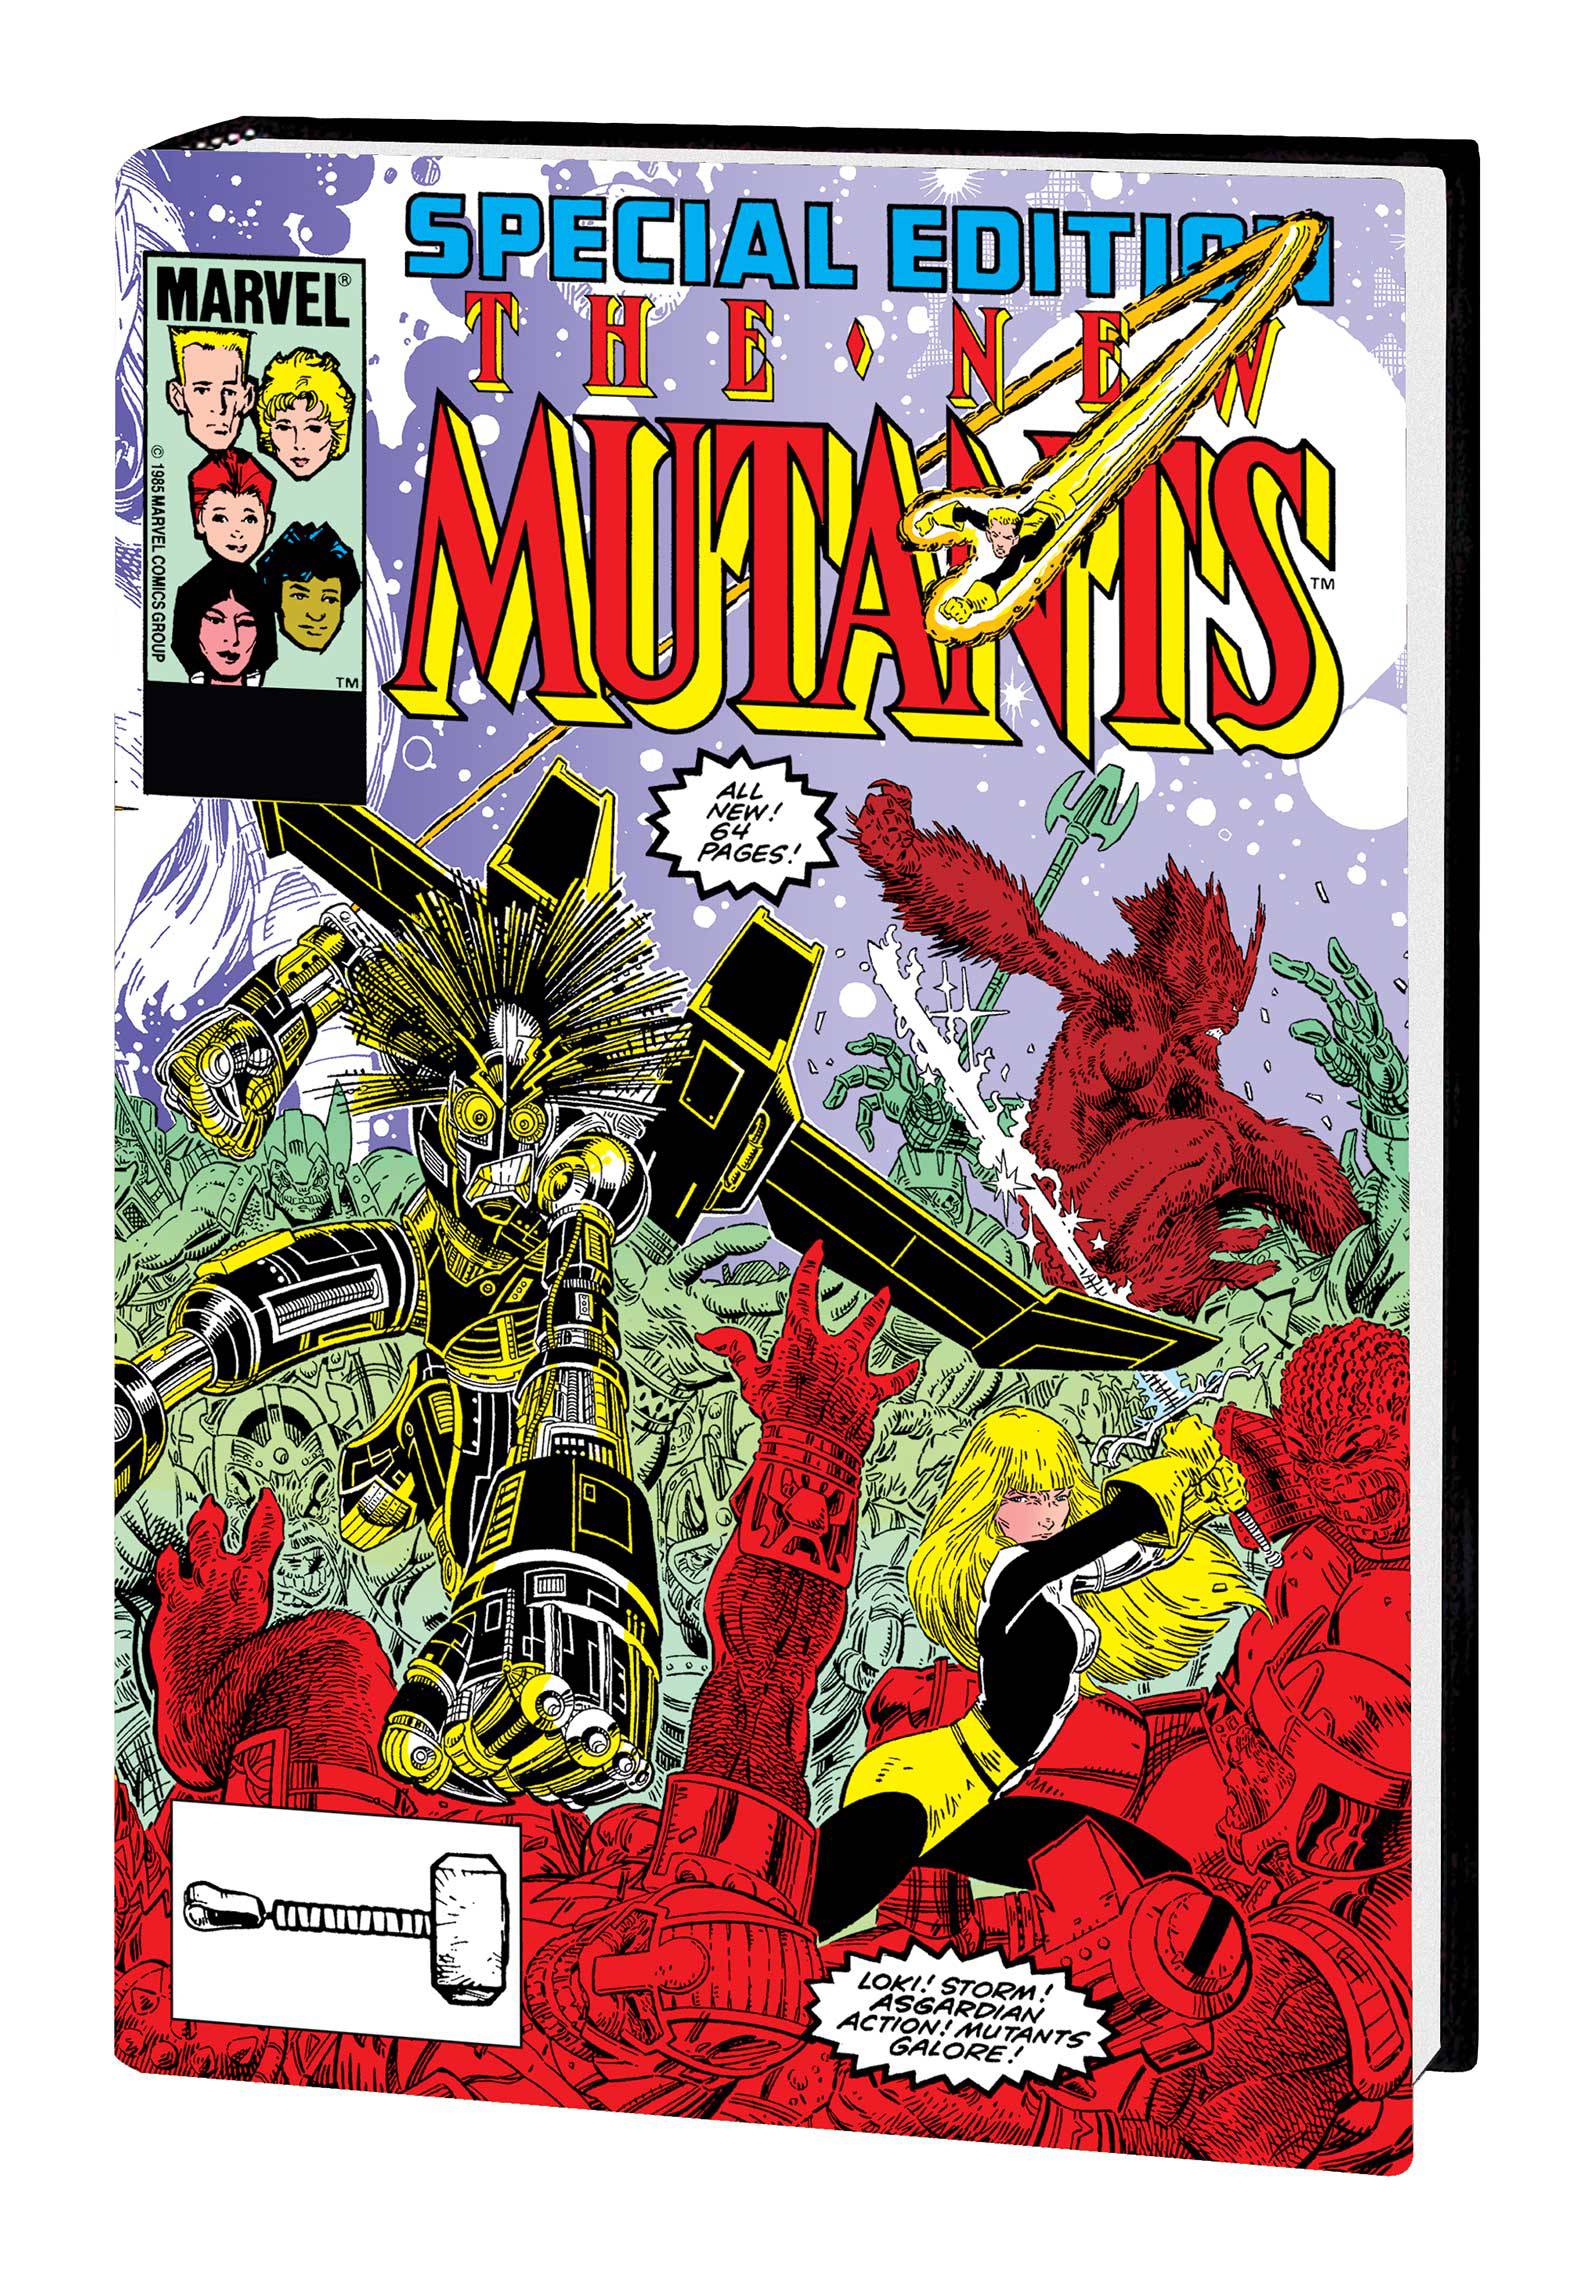 New Mutants #2 Cover by Bengal-12345